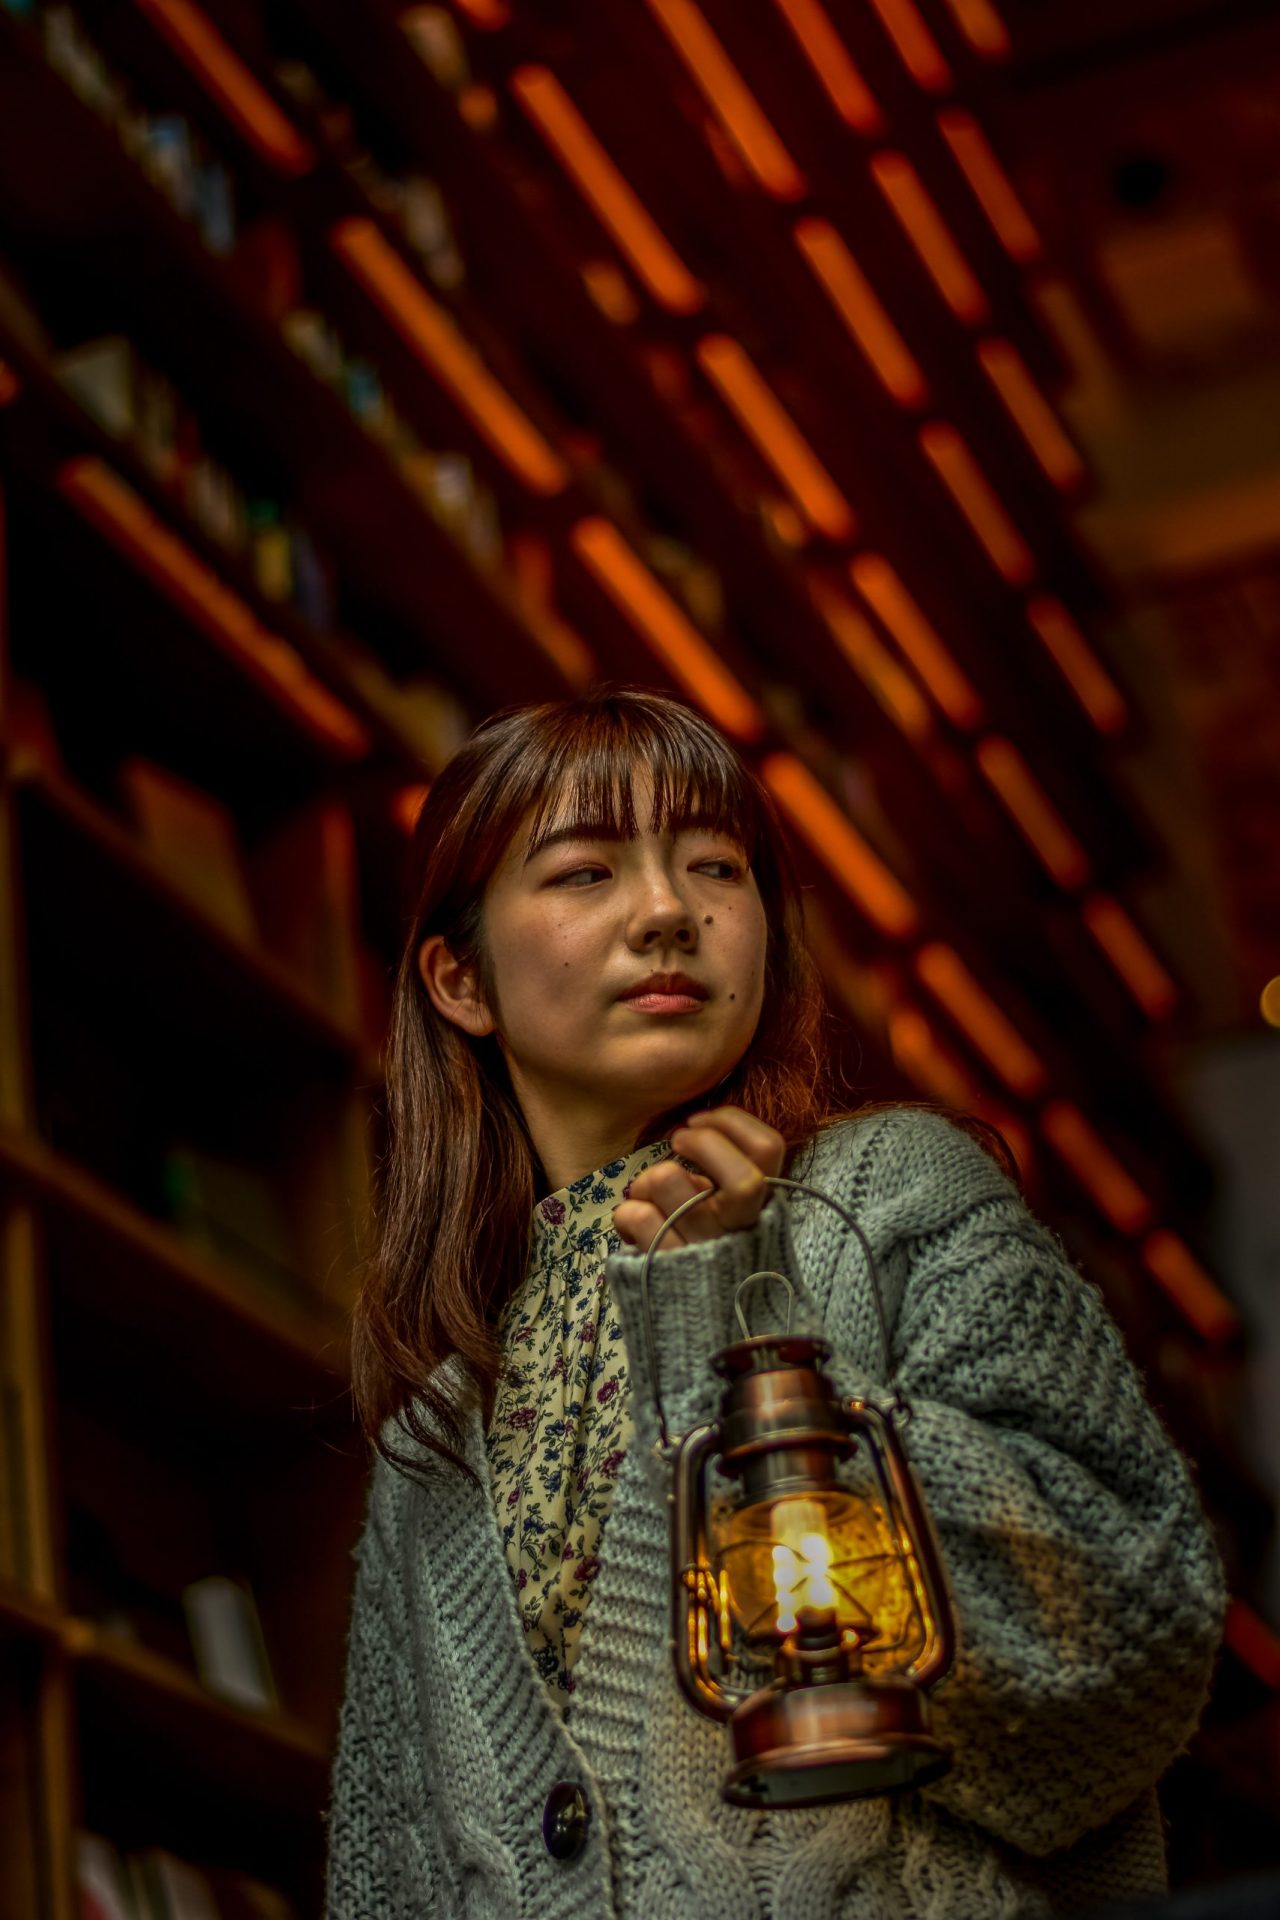 A japanese student girls portrait in a library with a lamp in her hand